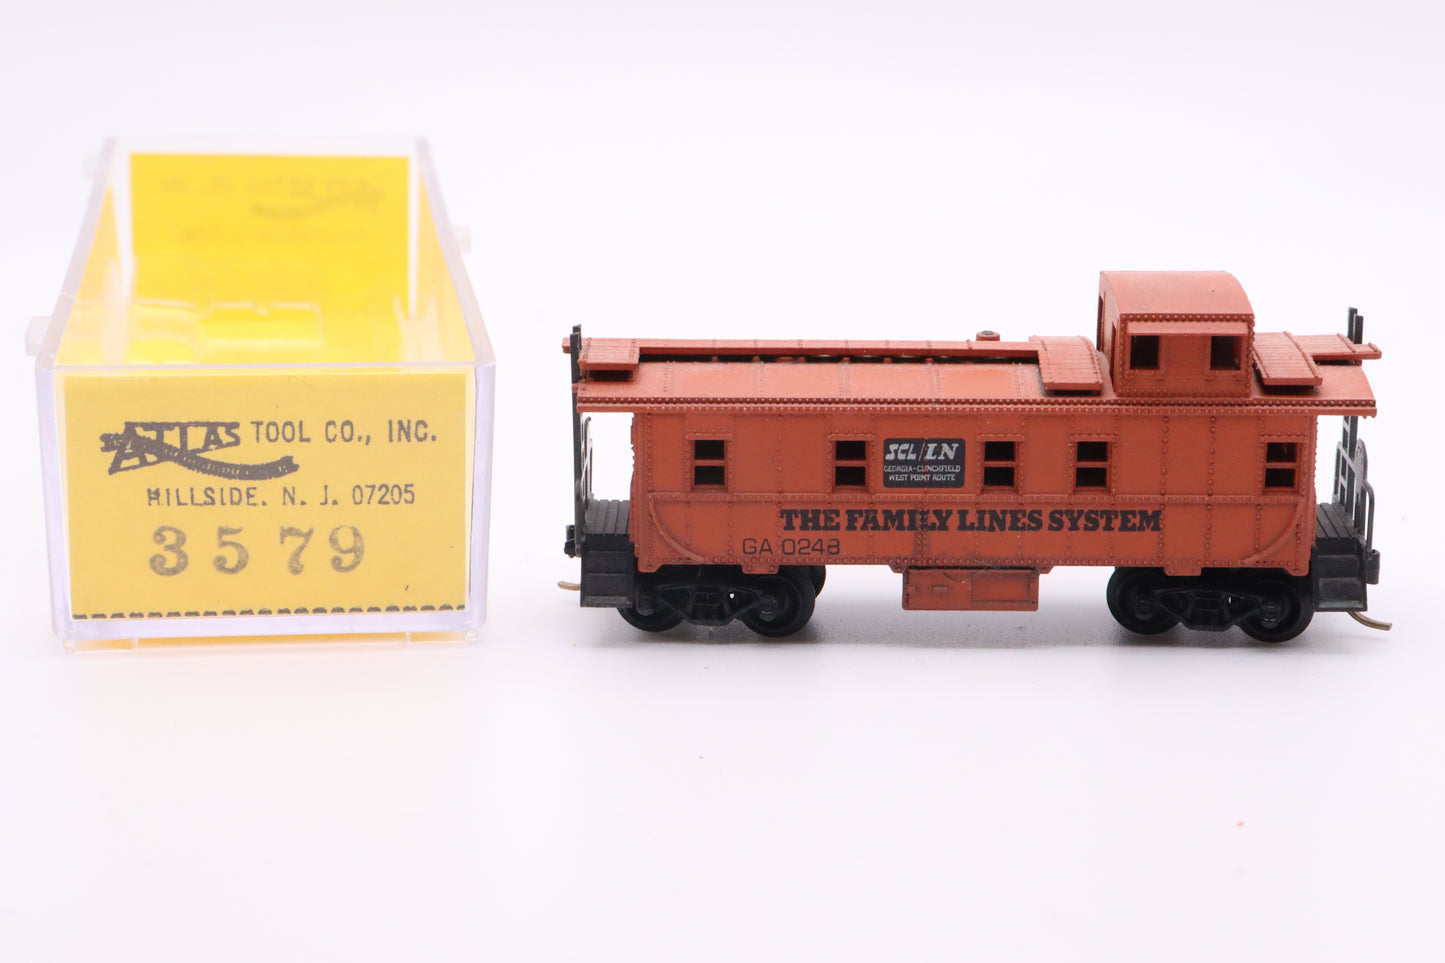 ATL-3579 - Caboose - The Family Lines System - GA #0248 (Weathered)